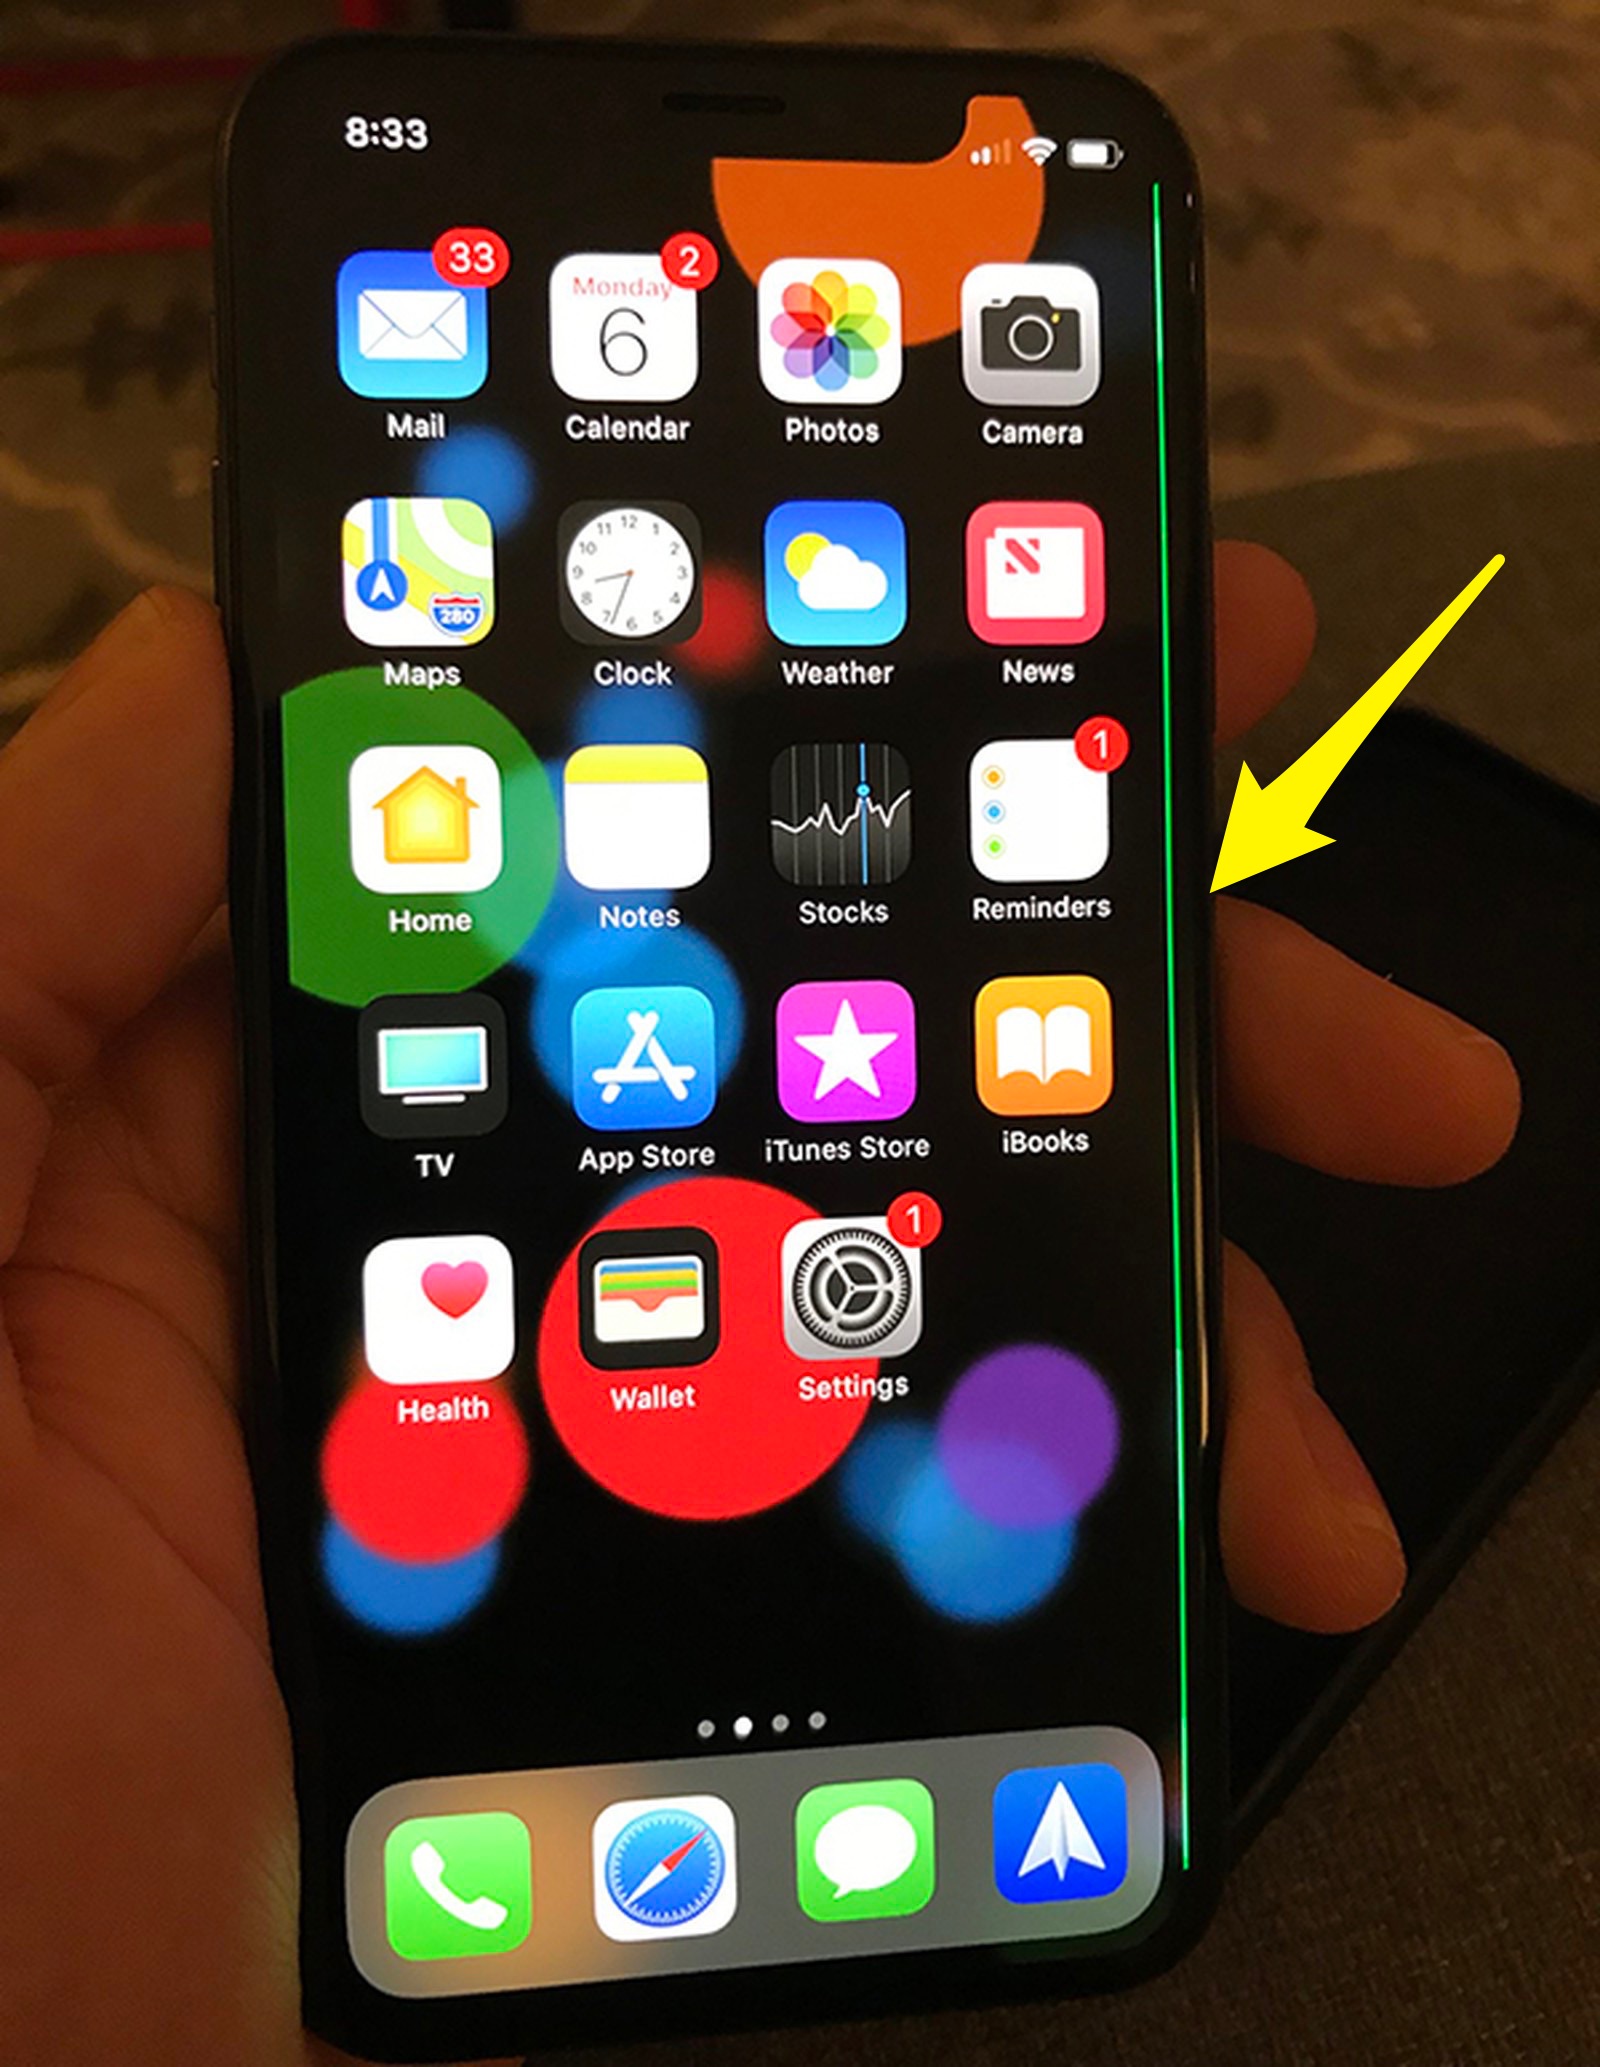 How To Fix Green Line On iPhone Screen